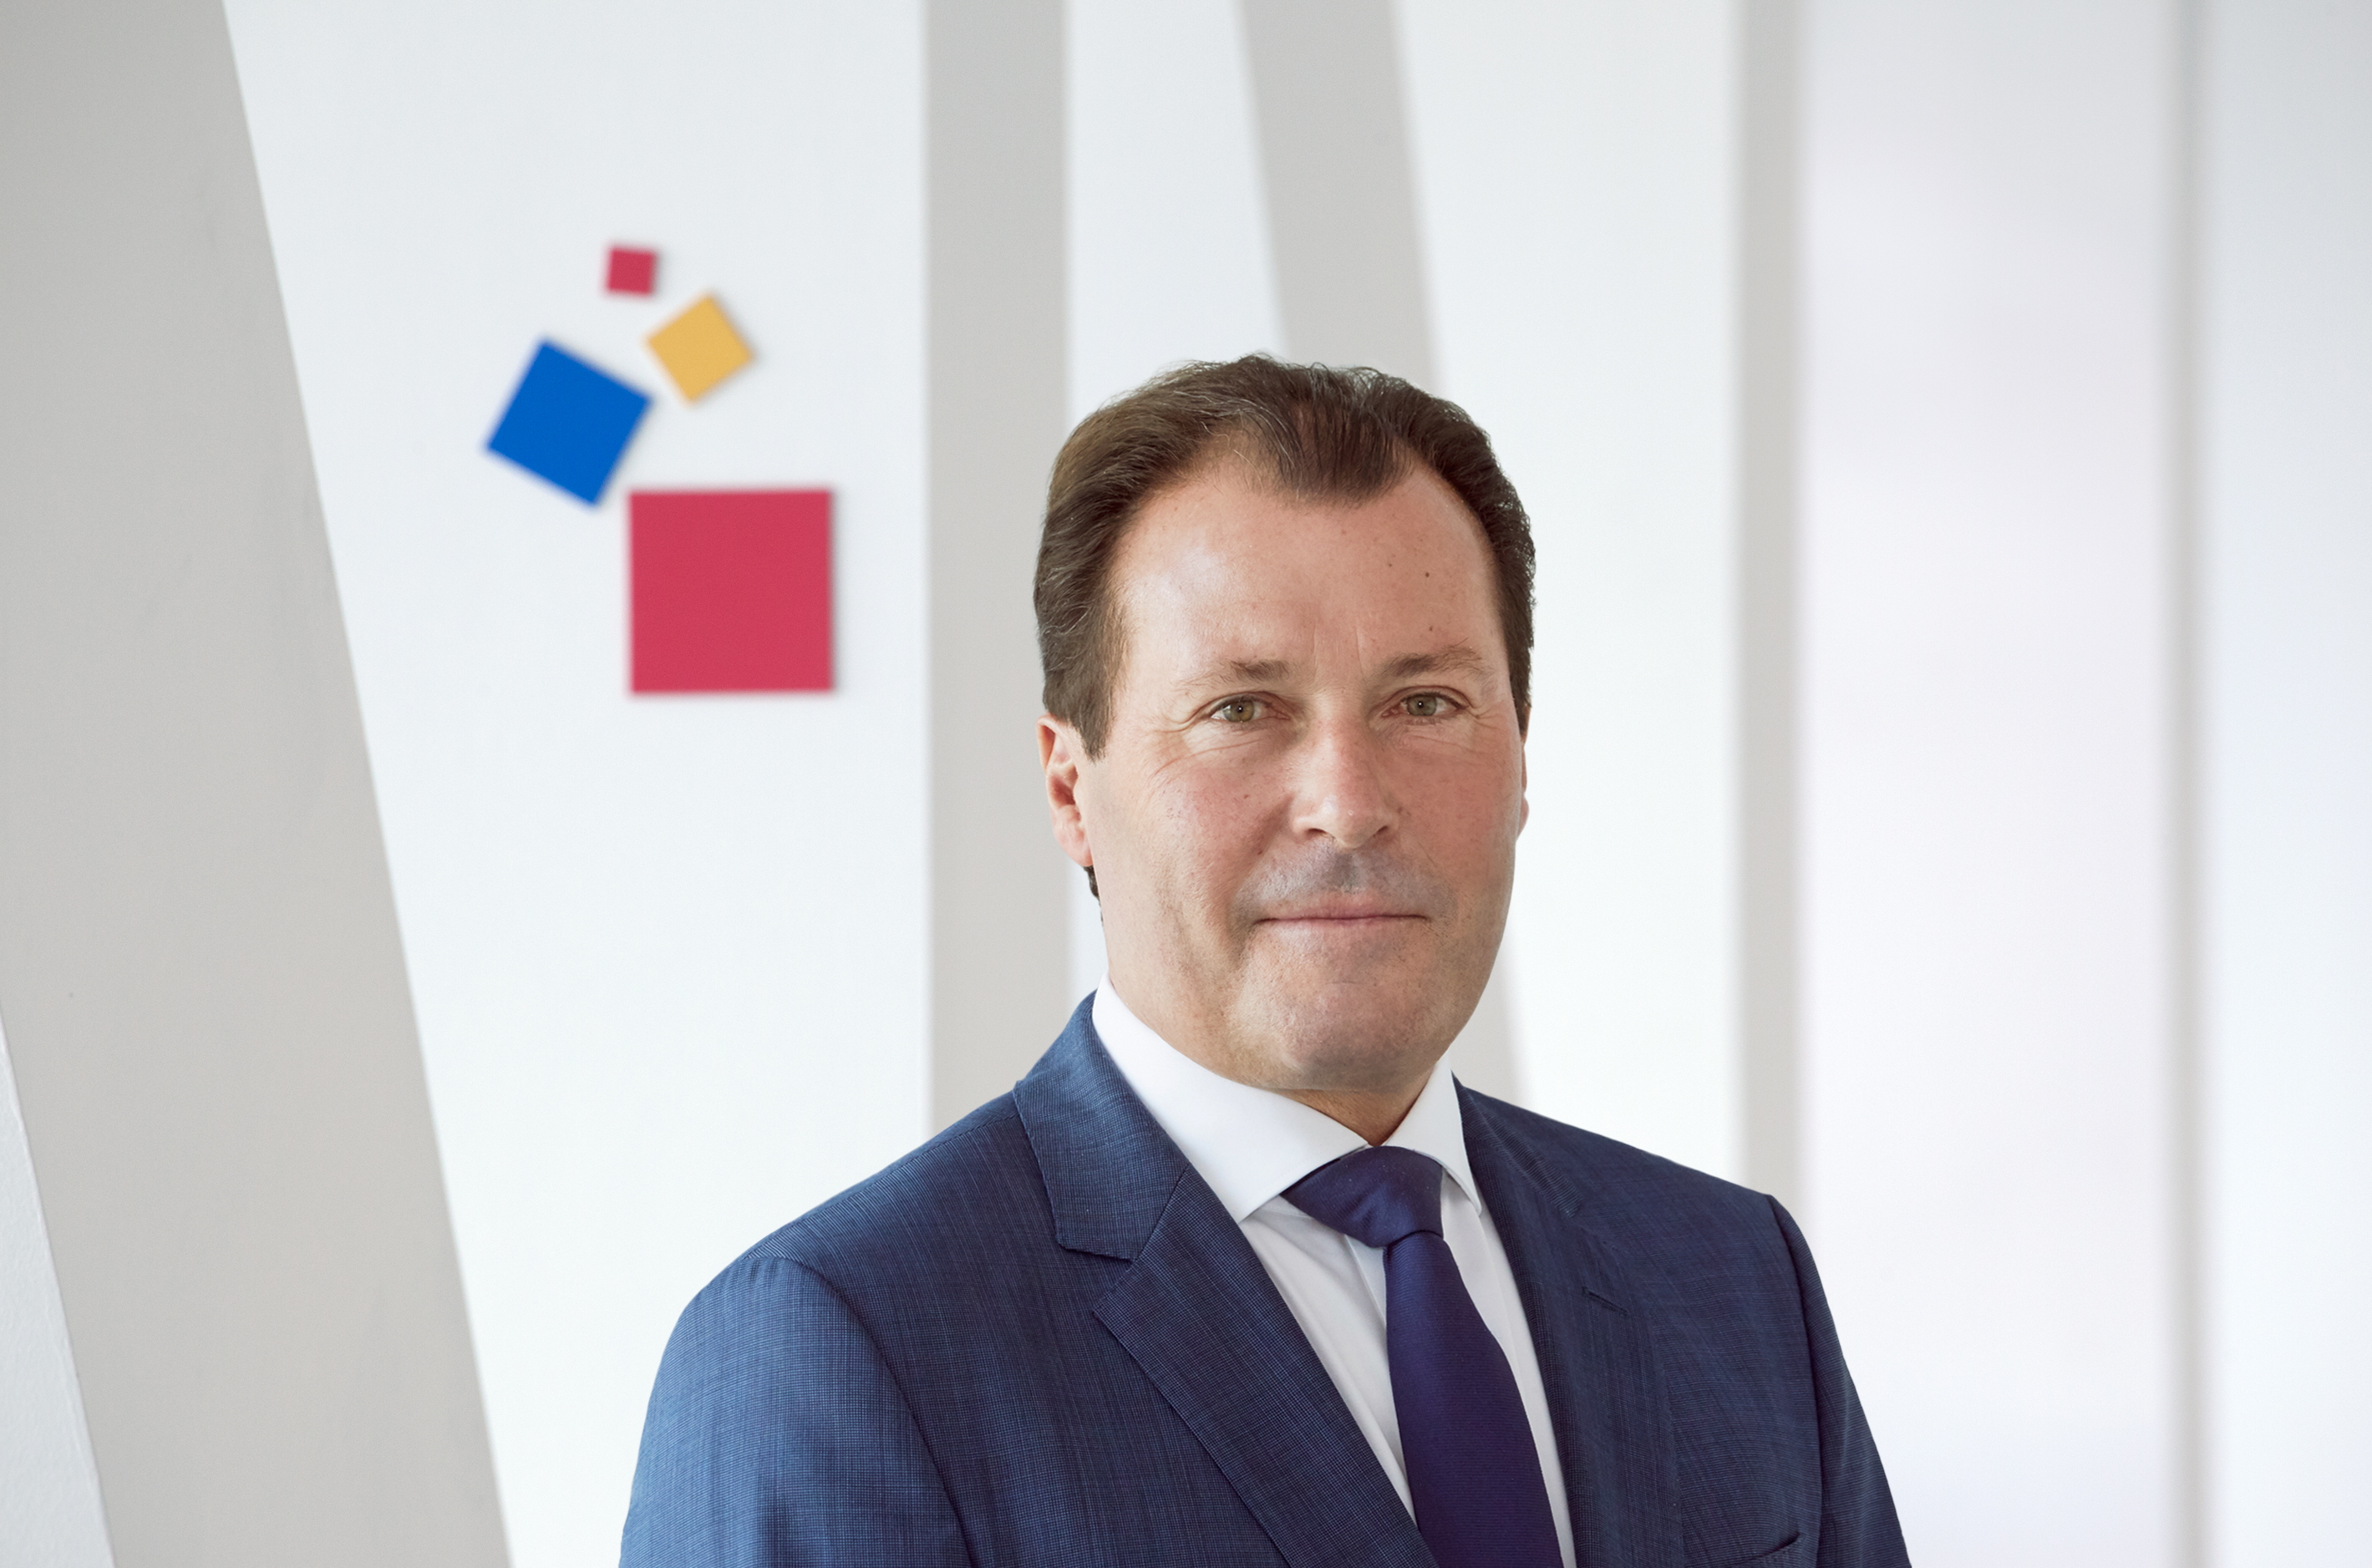 Wolfgang Marzin, President and Chief Executive Officer (CEO) of Messe Frankfurt GmbH